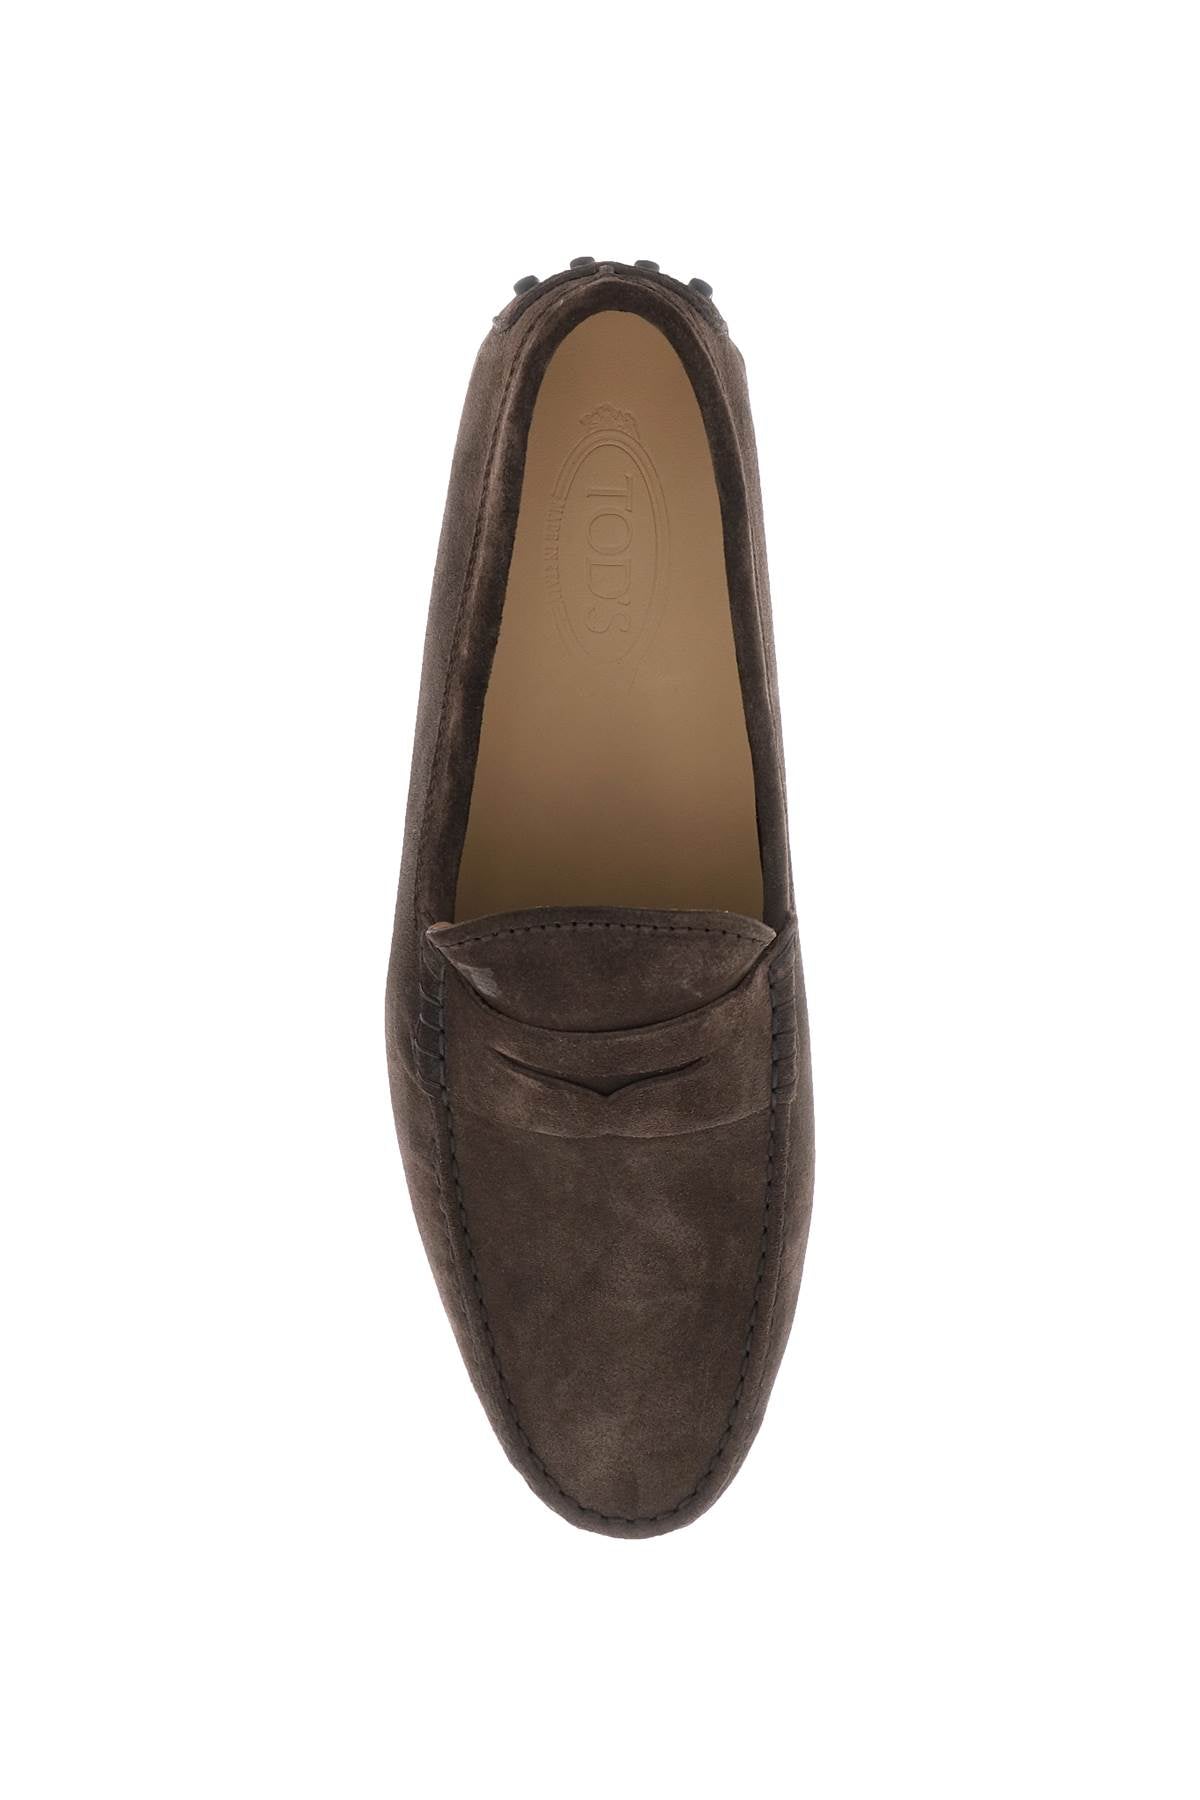 Tod'S Gommino Loafers-Tod'S-Urbanheer